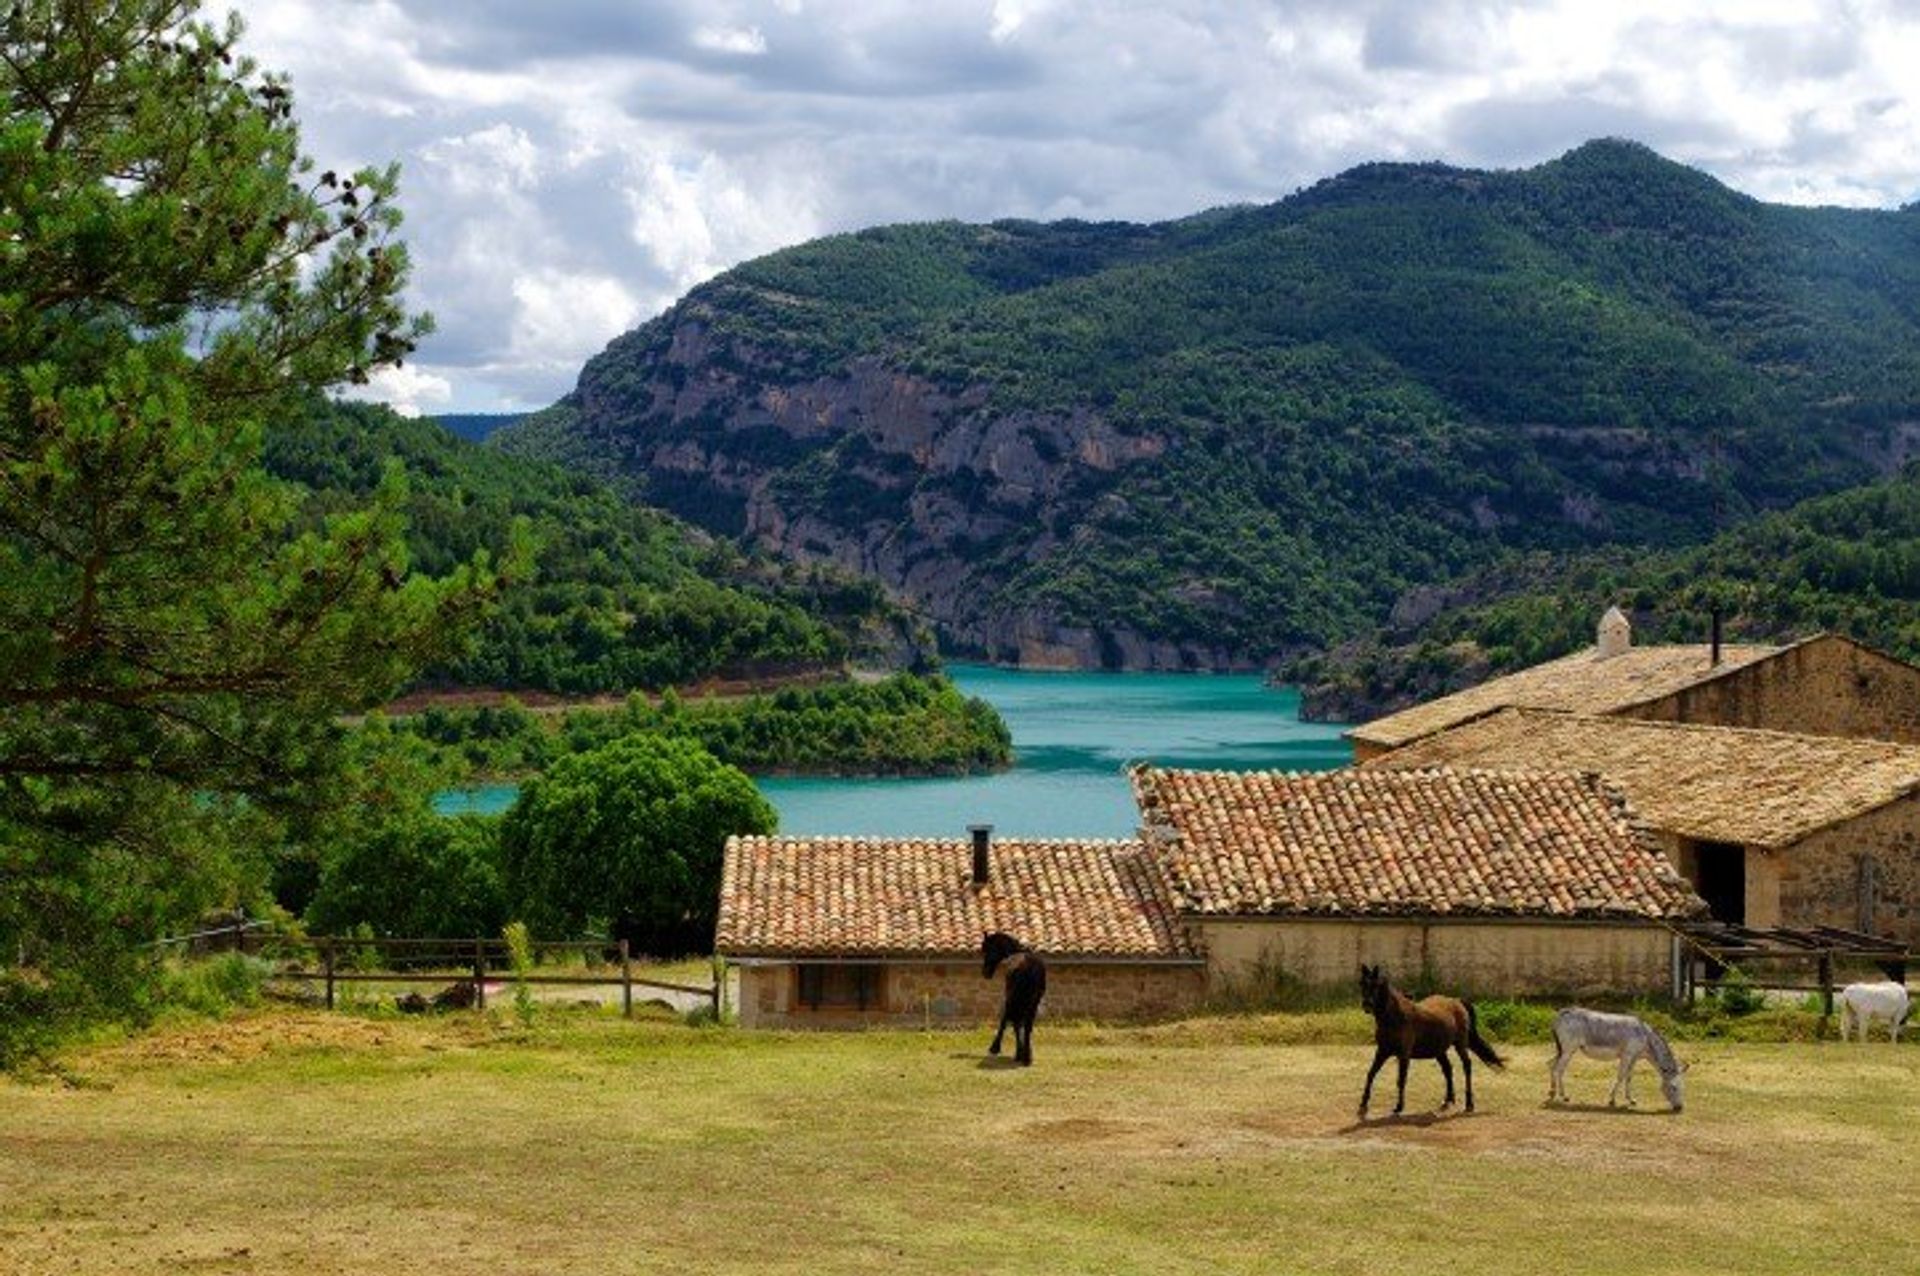 Lipica Stud Farm by Llosa del Cavall lake, Lleida Province, is one of the oldest in the world